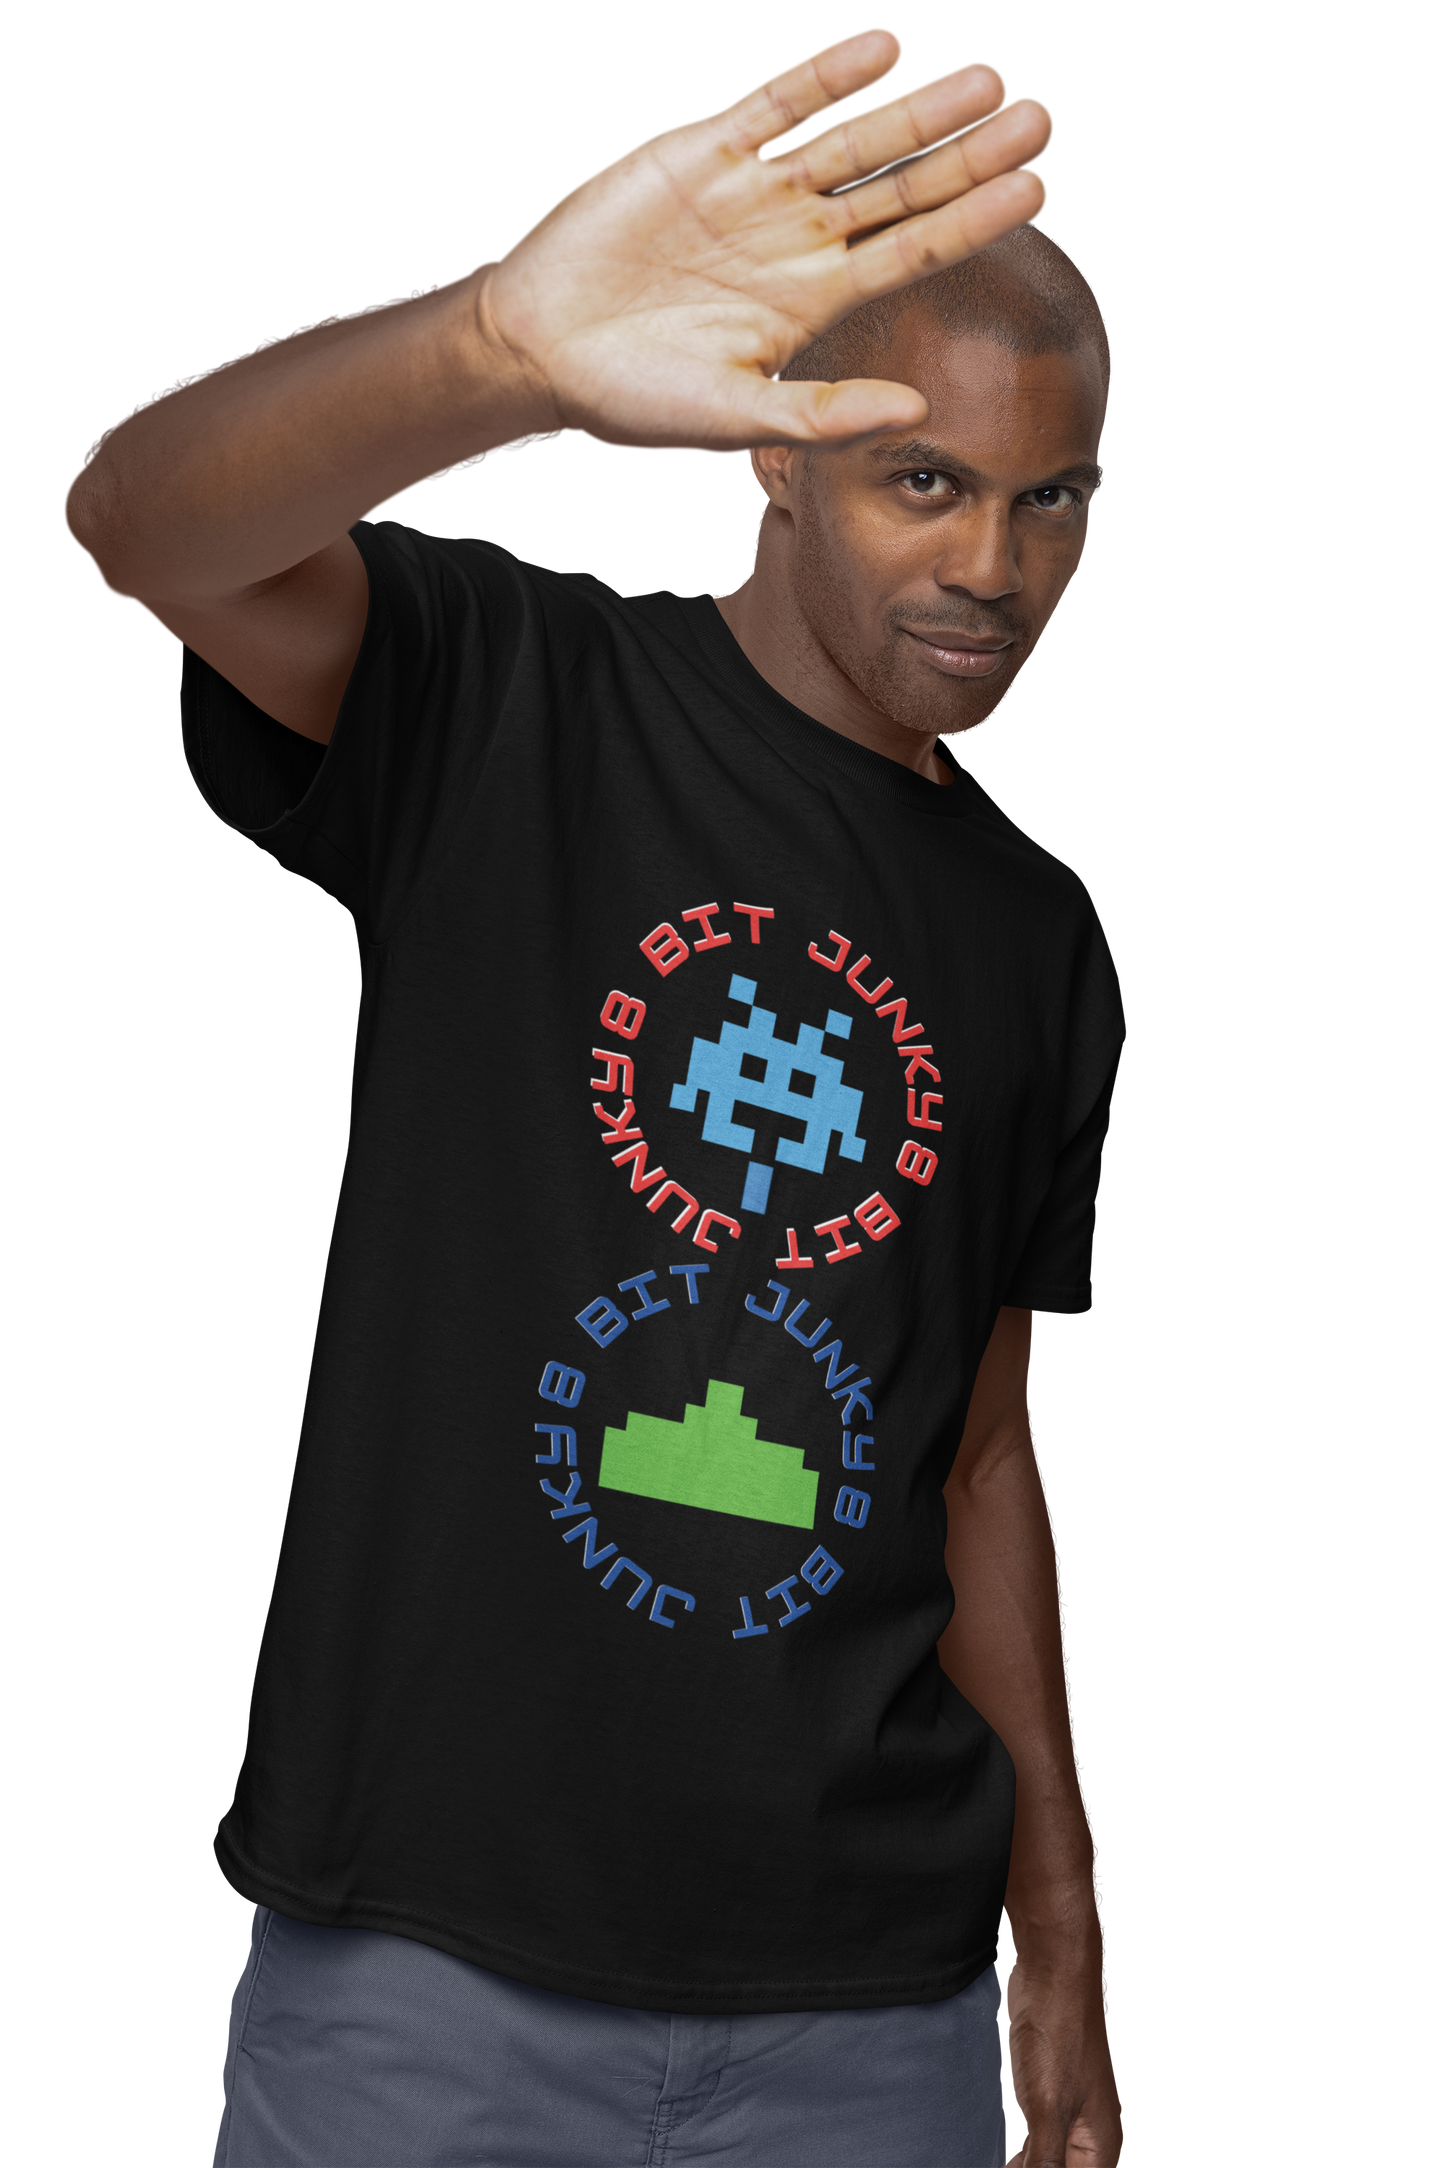 A man wearing a black T-Shirt with words 8-bit junky in 2 circles making a figure 8 with an invader in one circle and earth ship in the other